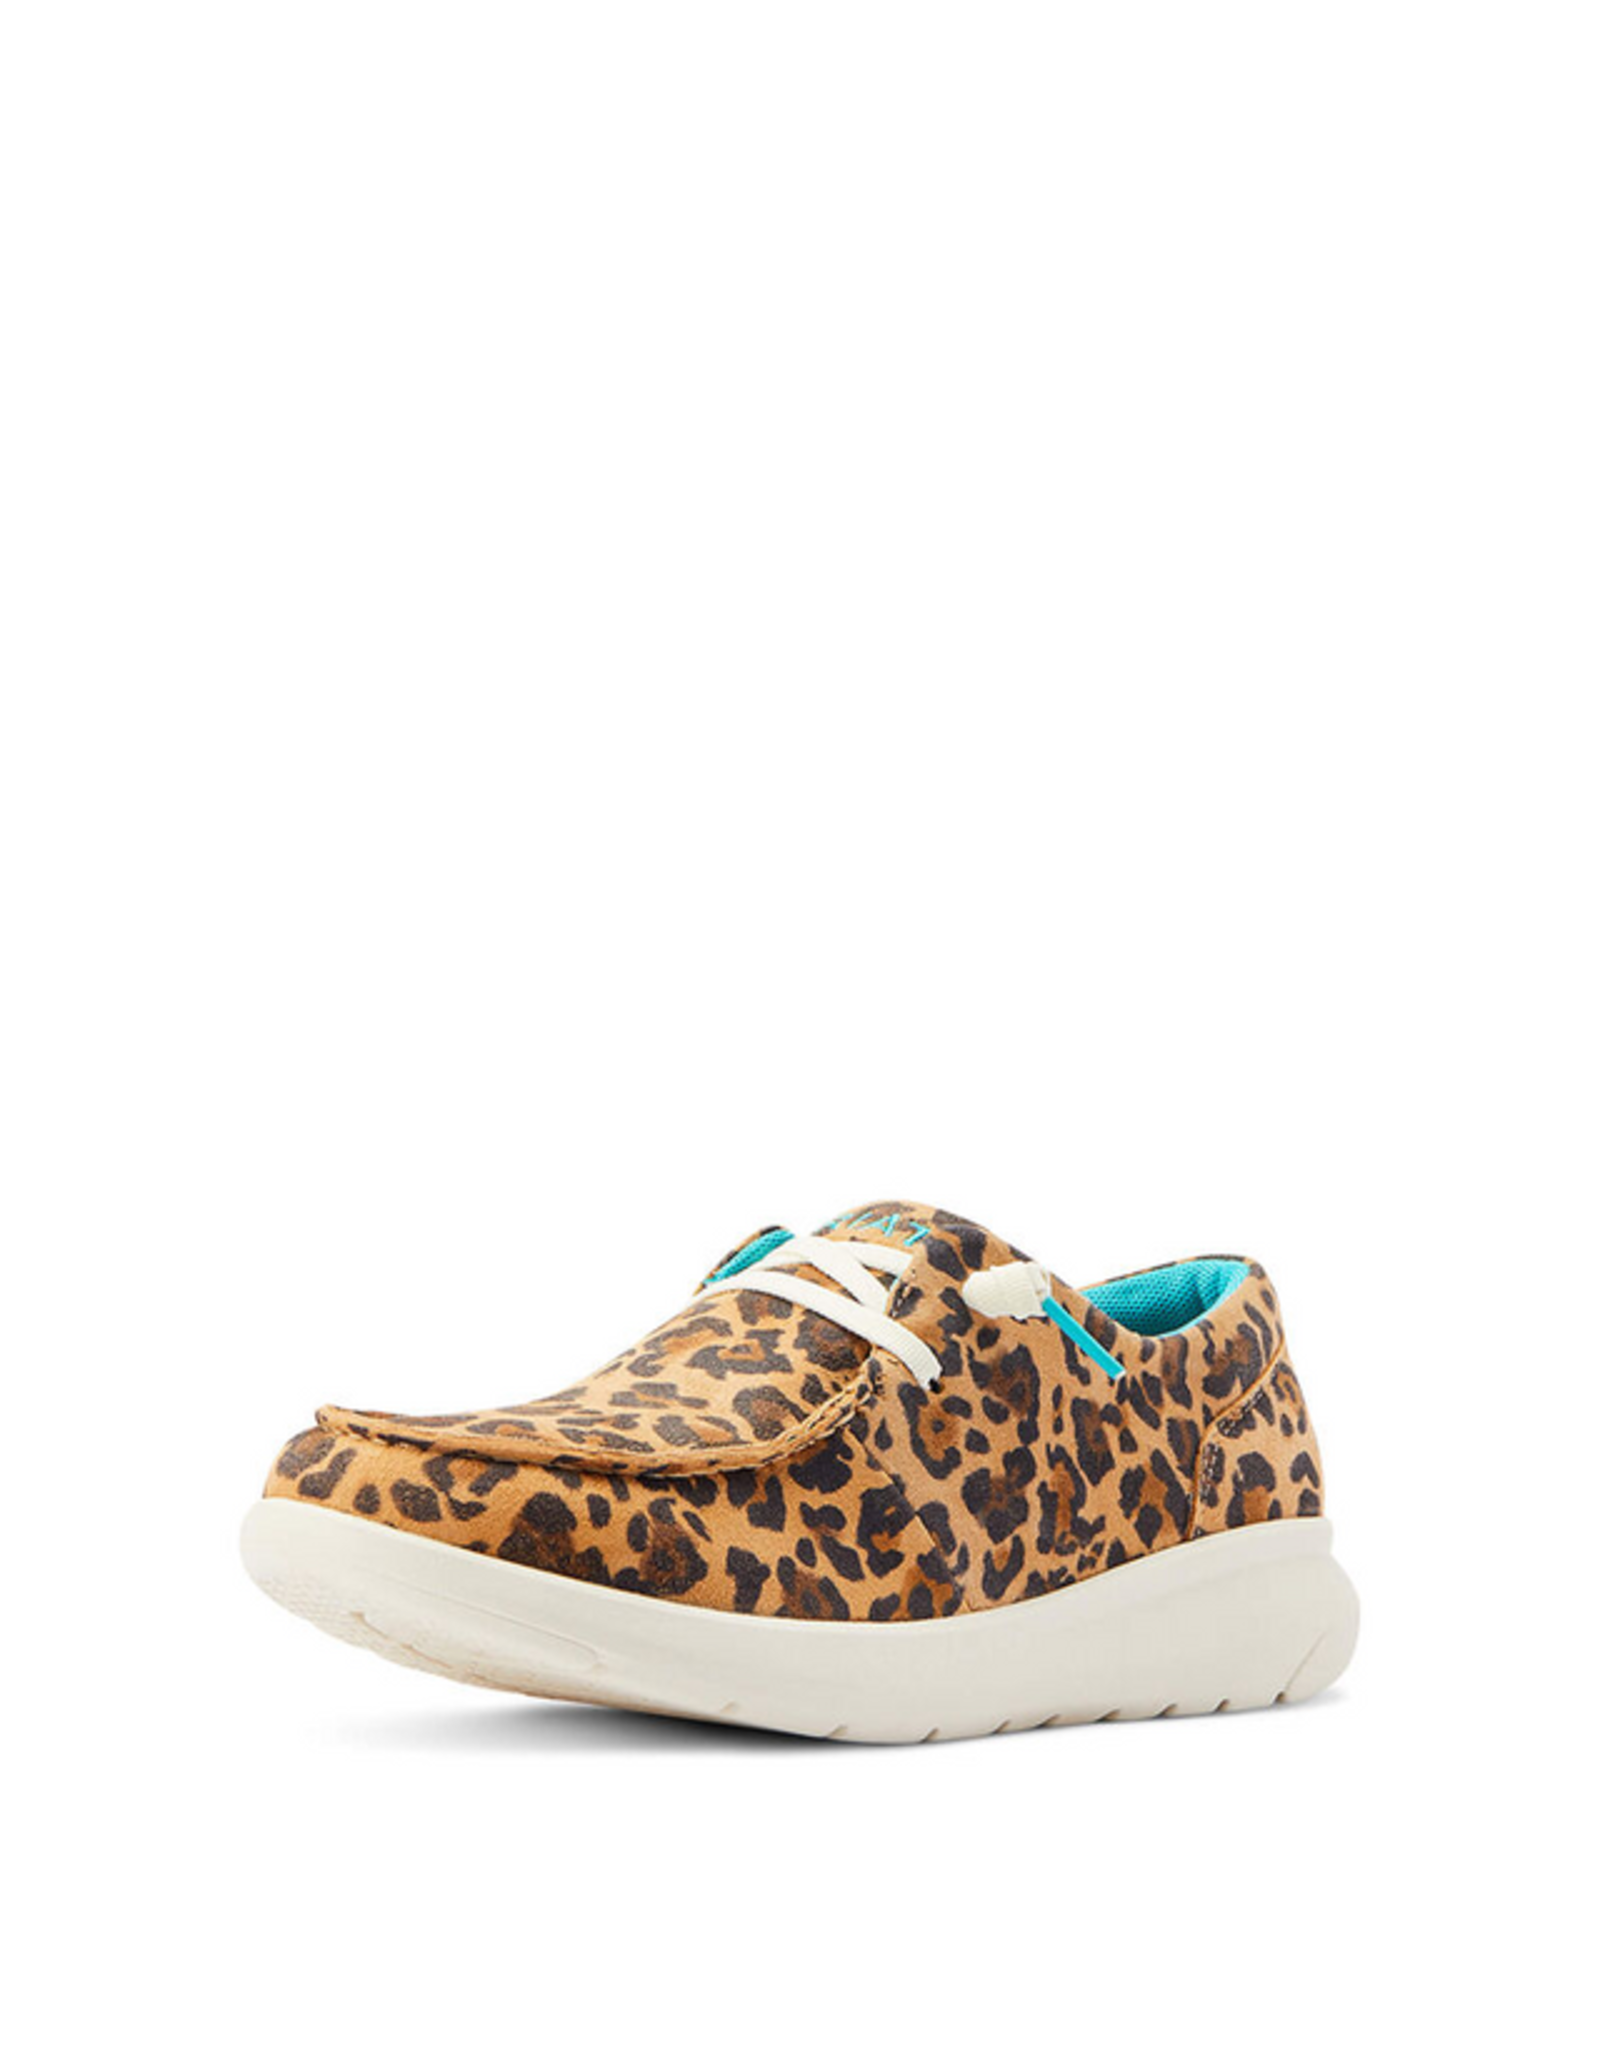 Ariat Ariat Ladies Hilo Lovely Leopard Print 10044587 Casual Shoes